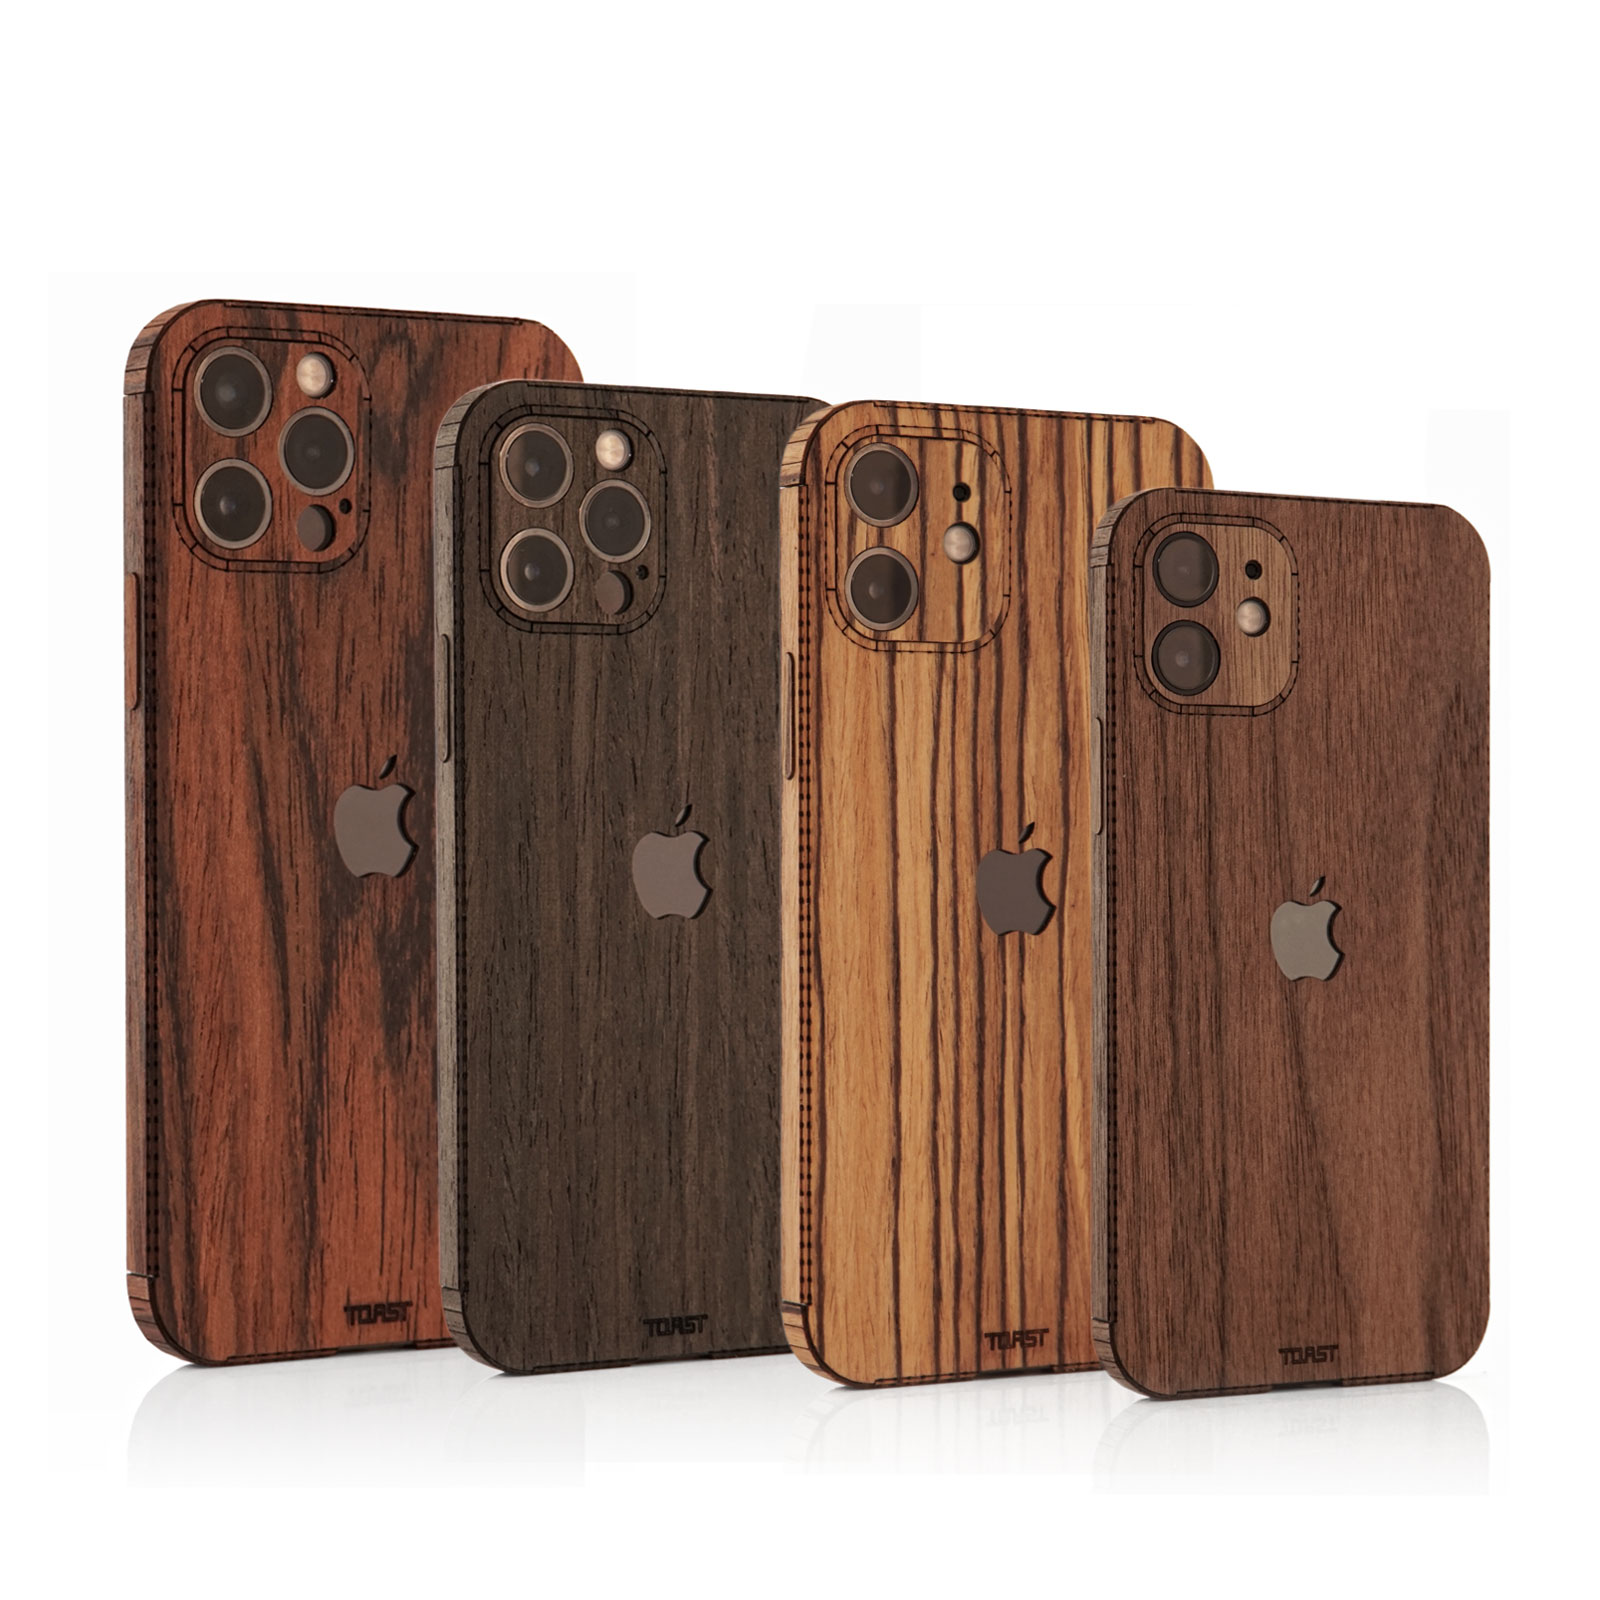 Wooden iPhone 12 Pro Max Case, Solid Wood iPhone 12 Mini Case, Apple iPhone  Protective Bumper Cover From Wood, Birthday Gift for Him 